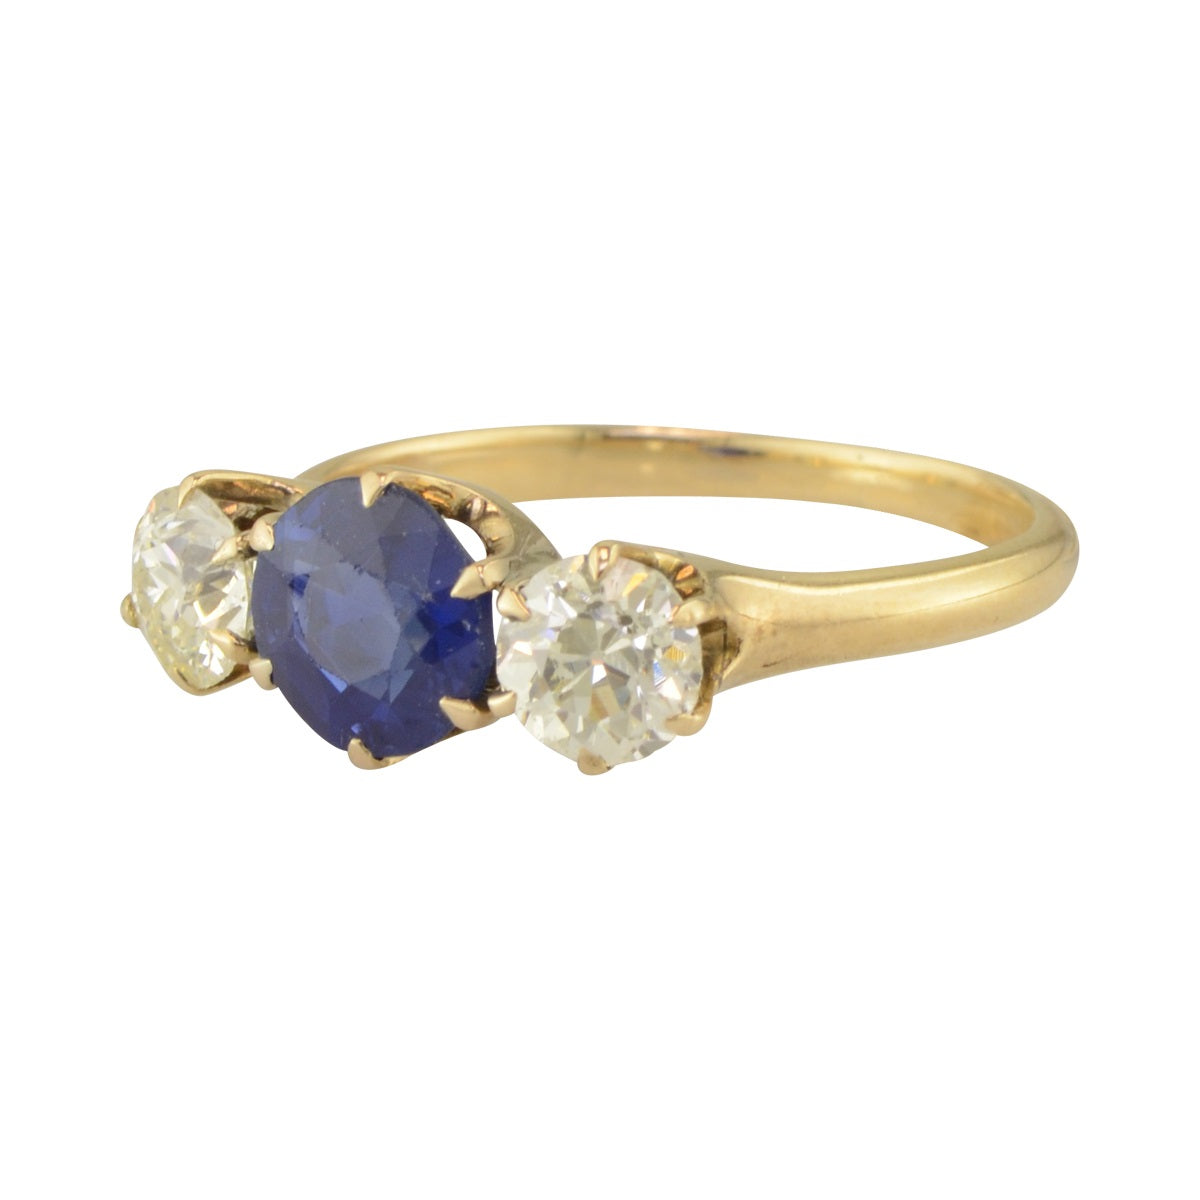 Three stone antique engagement ring with sapphire and diamond in 14k yellow gold. 